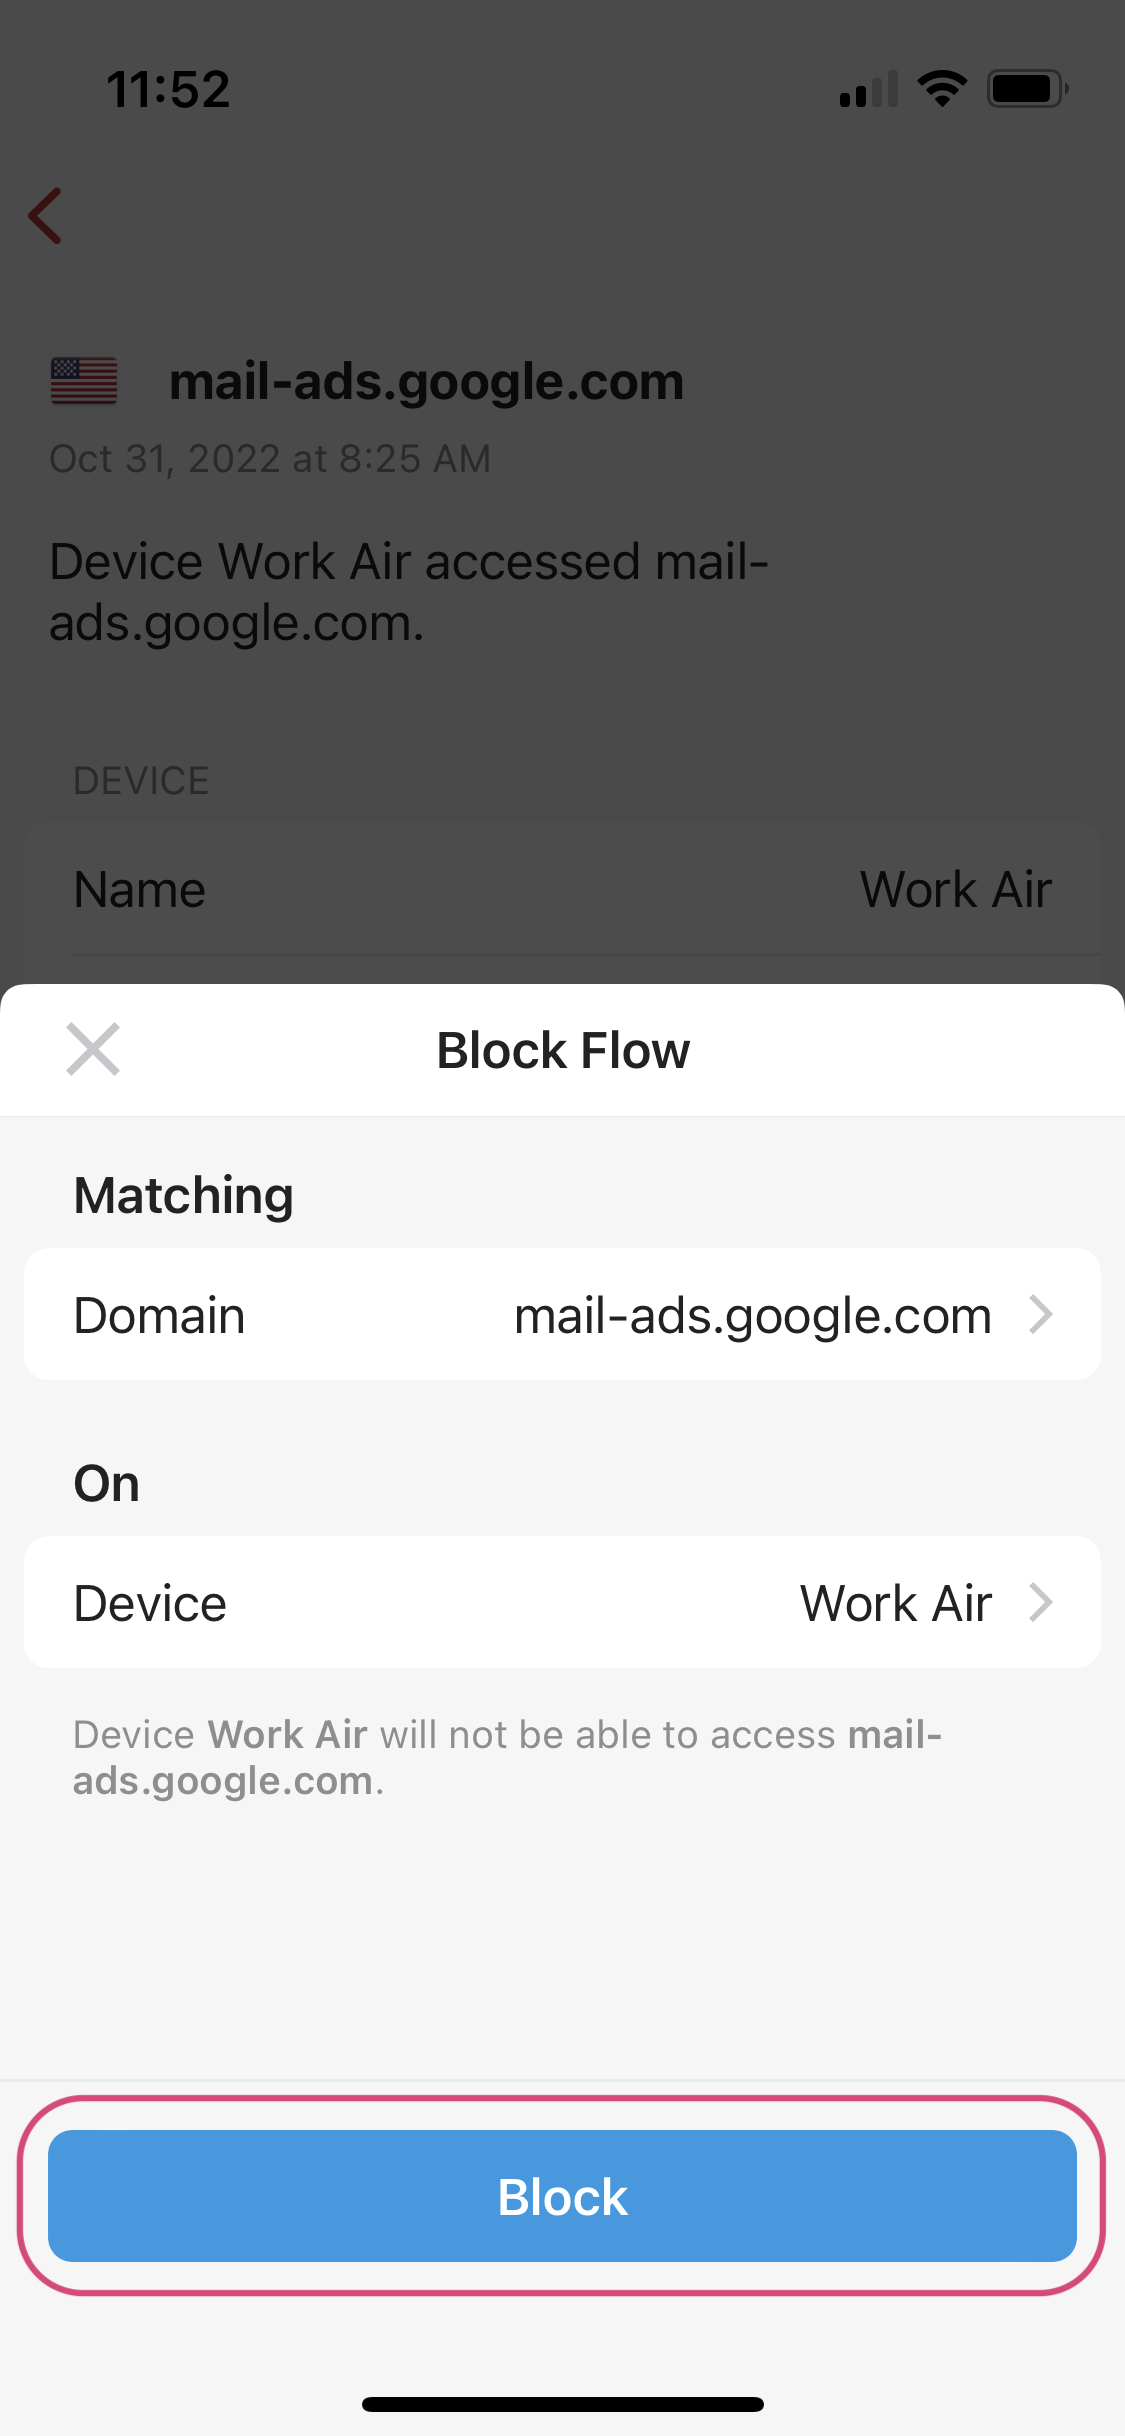 Now that you have select the network and the block option you will now select the block button